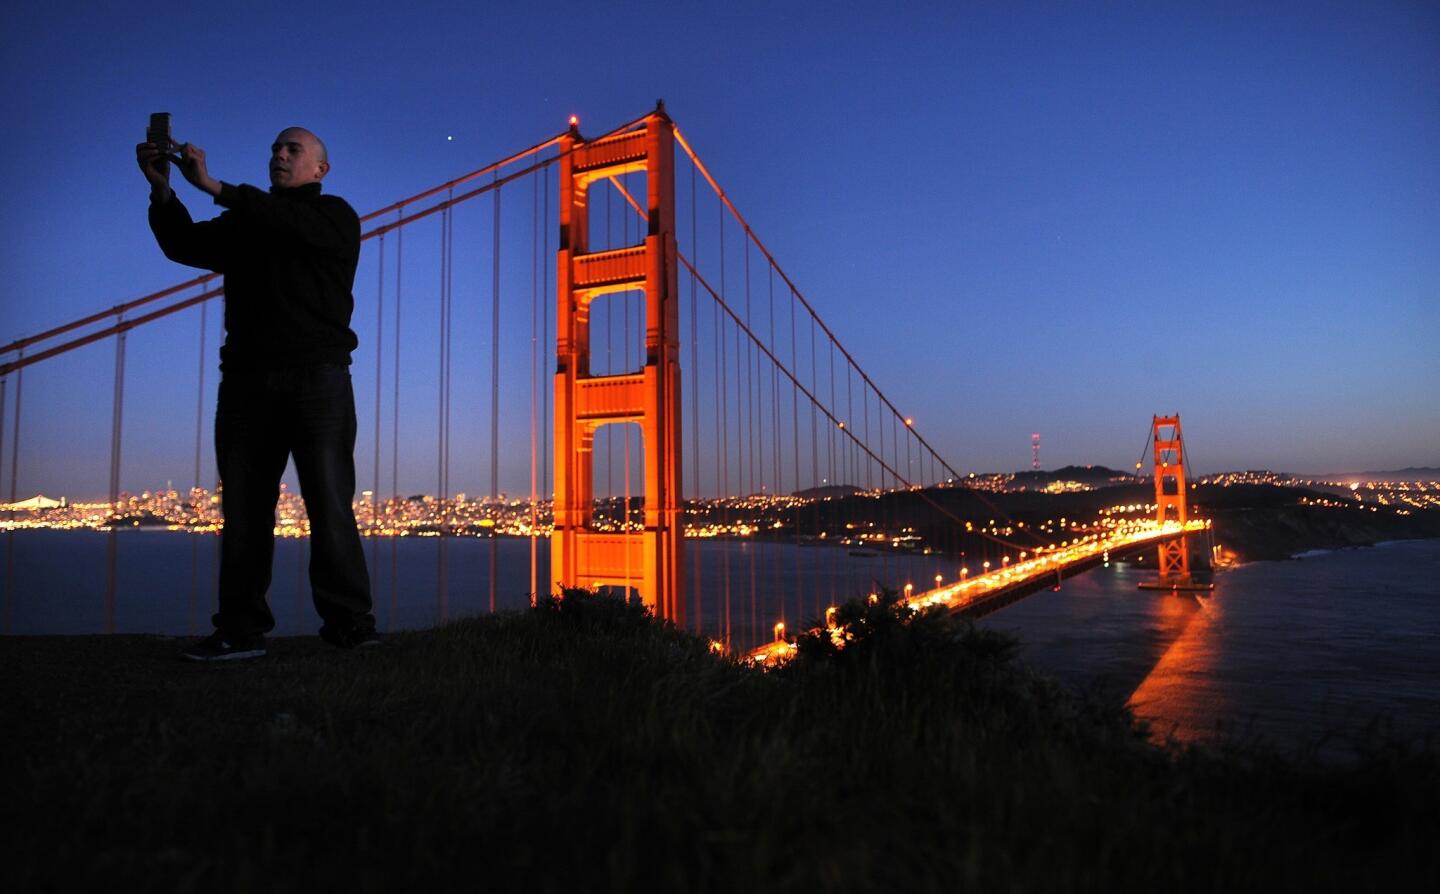 Carlos Rodriquez takes a photo of himself and the Golden Gate Bridge at dusk.